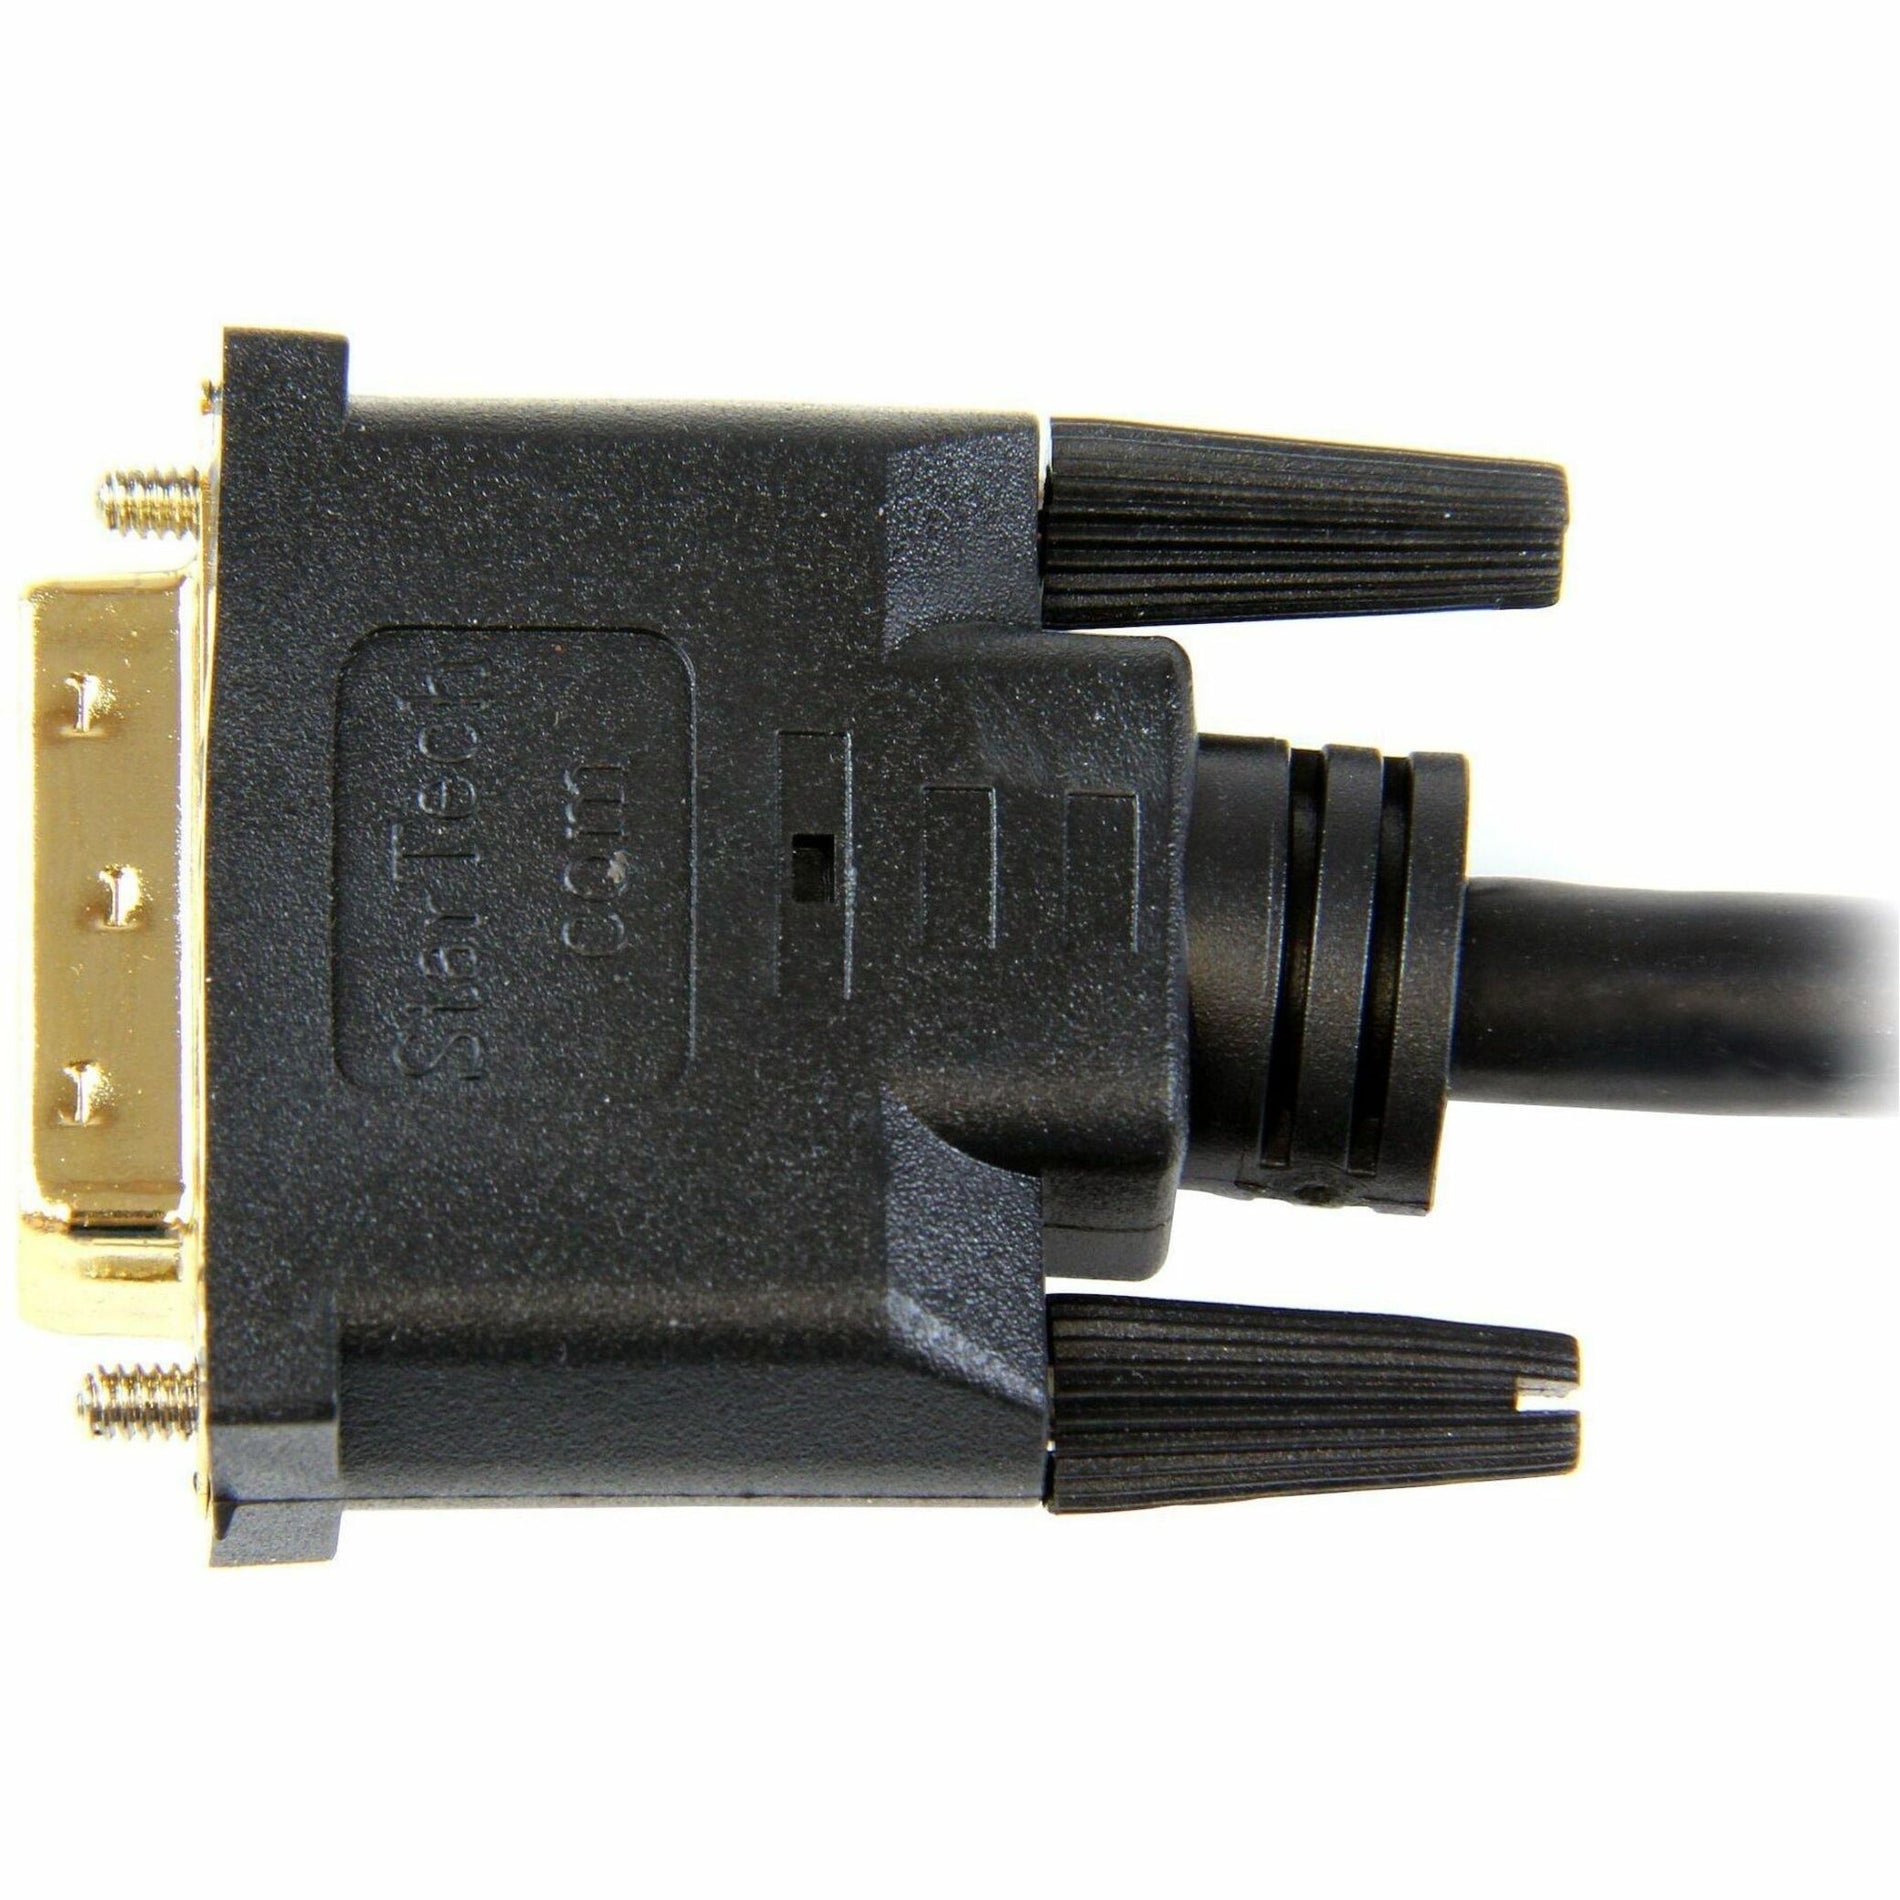 StarTech.com HDDVIMM3 3 ft HDMI to DVI-D Cable - M/M, Molded, Strain Relief, Passive, Copper Conductor, Gold Plated Connectors